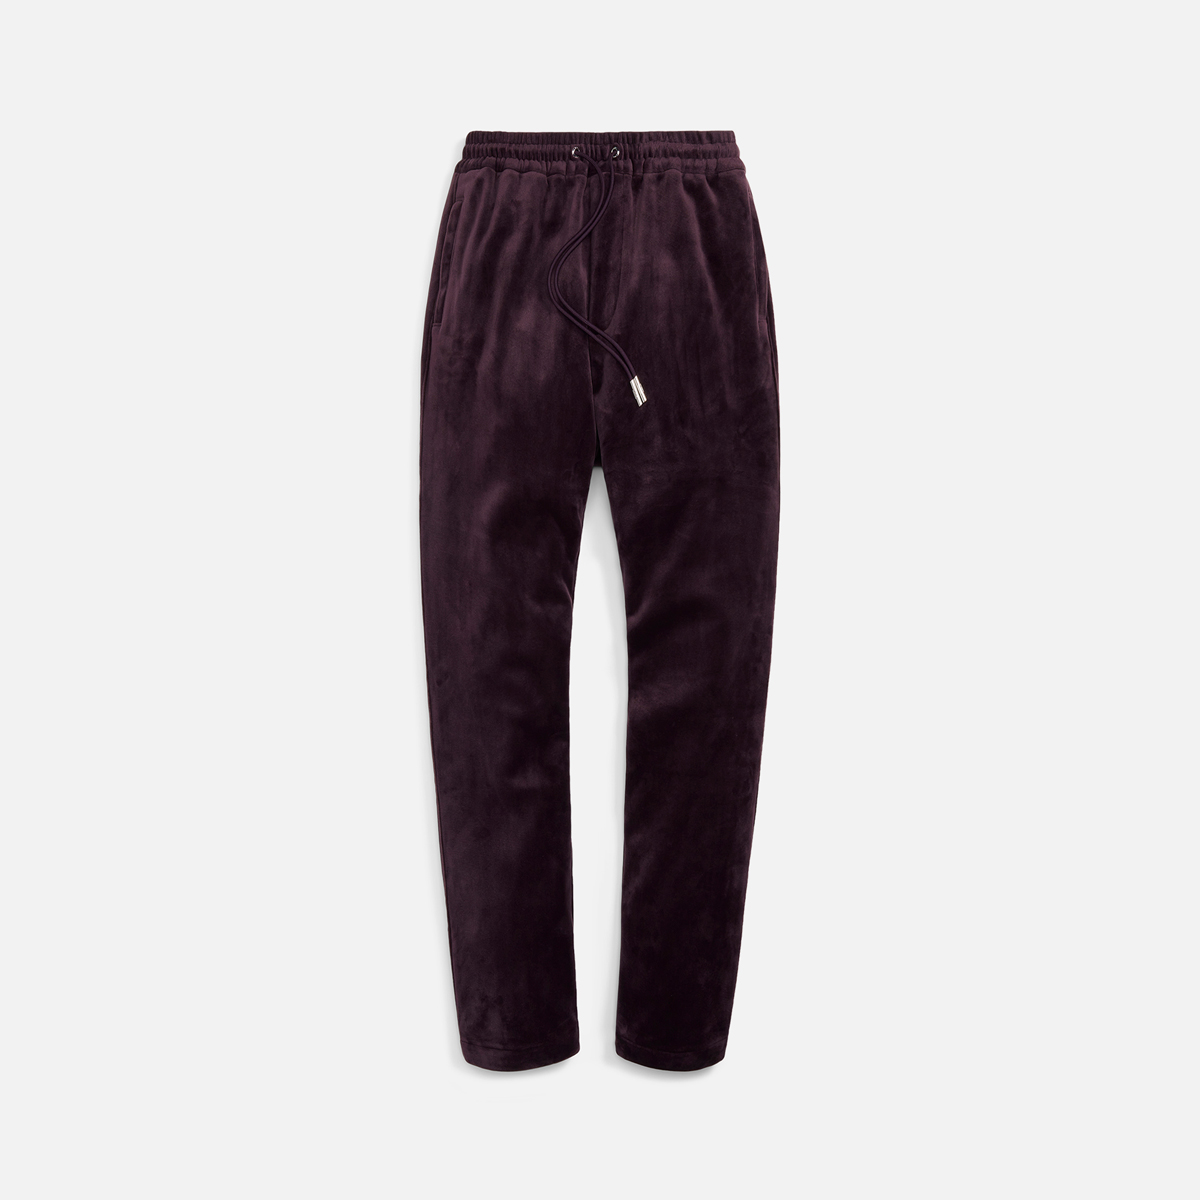 kith-fall-winter-2021-collection-bottoms-03